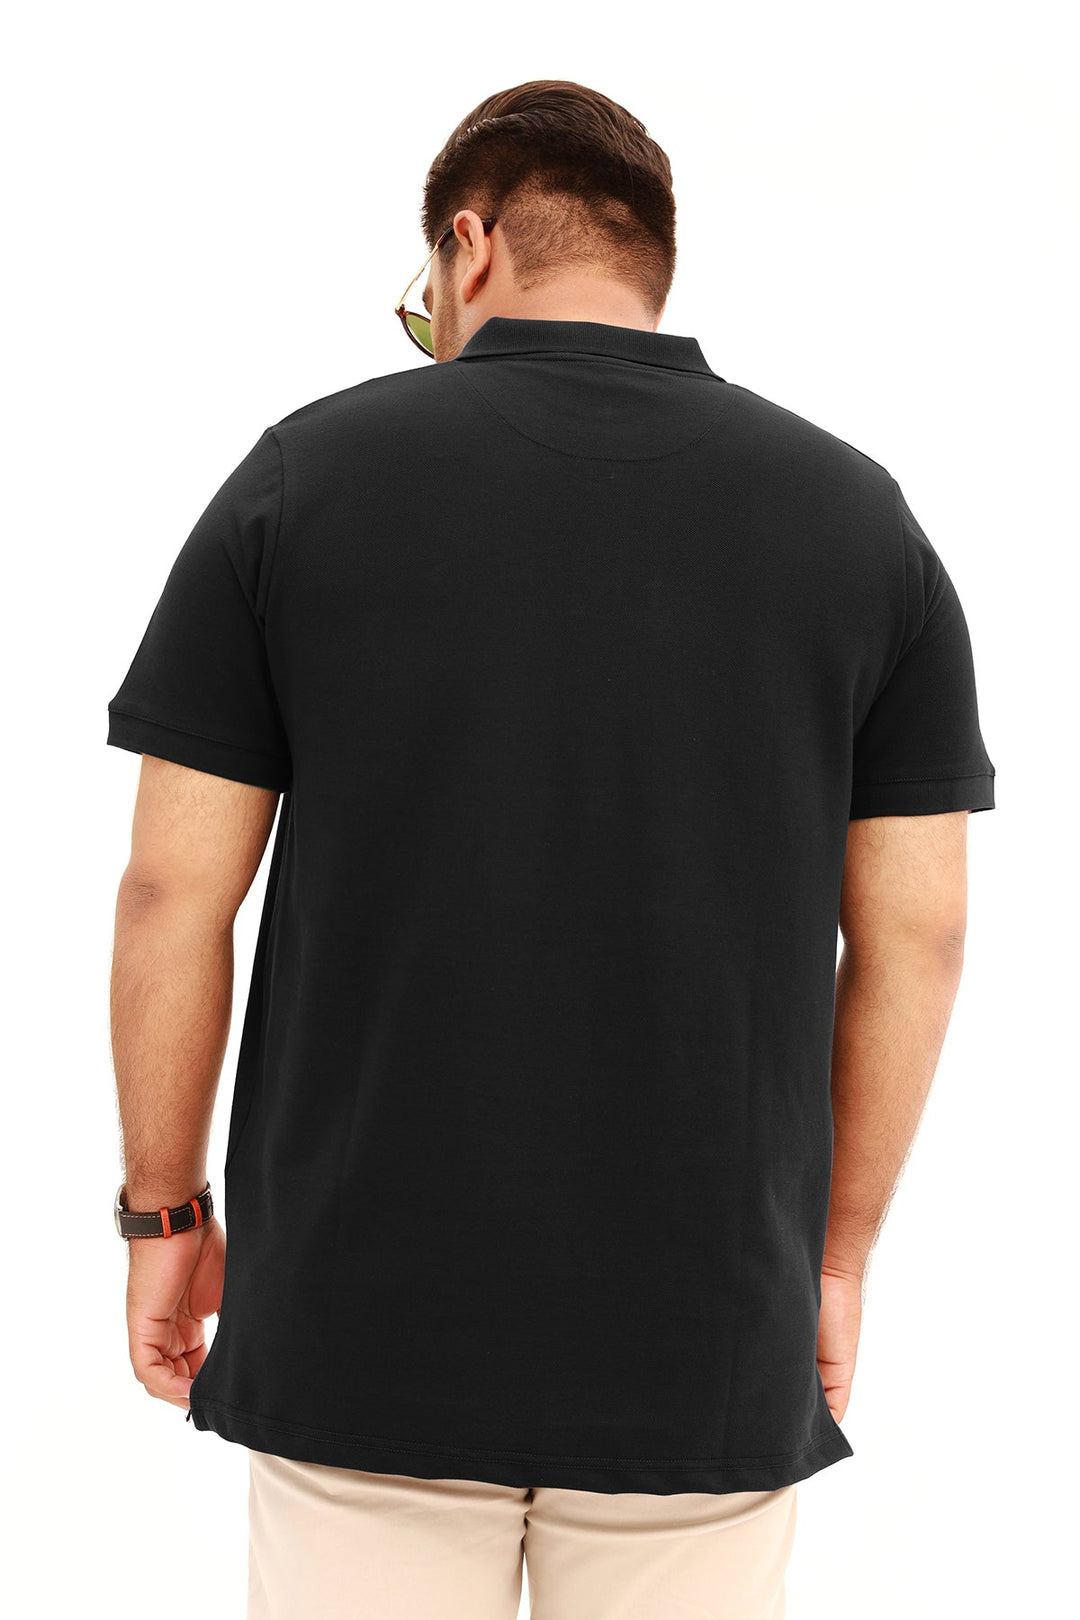 Jet Black Embroidered Polo Shirt (Plus Size) - A23 - MP0199P